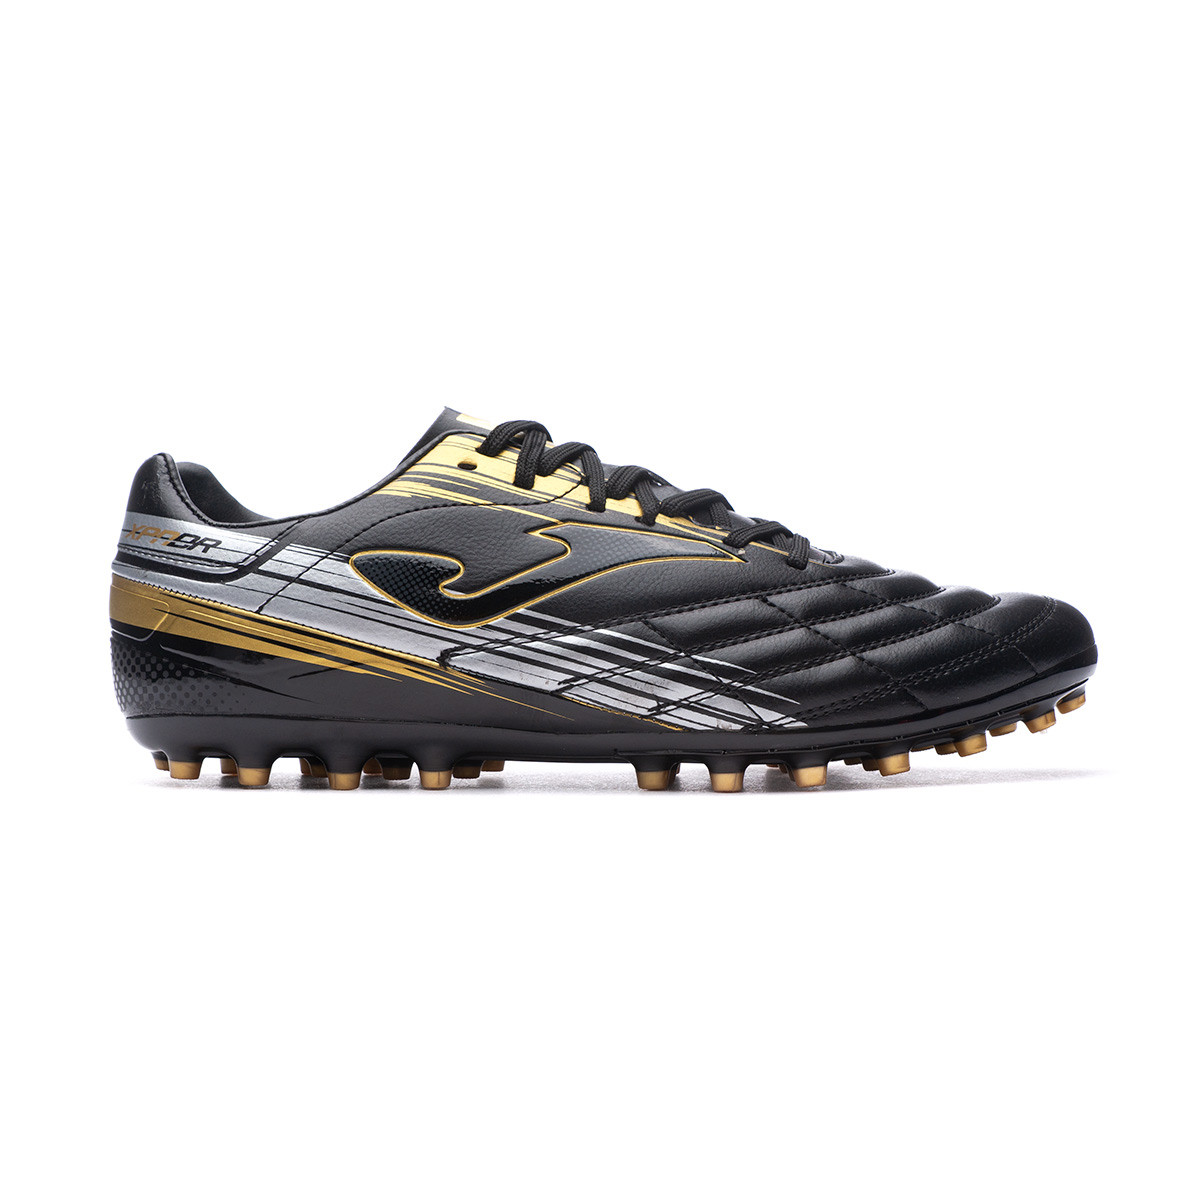 Football boots shoes Joma Cleats XPANDER 901 AG Black Men Artificial Grass 